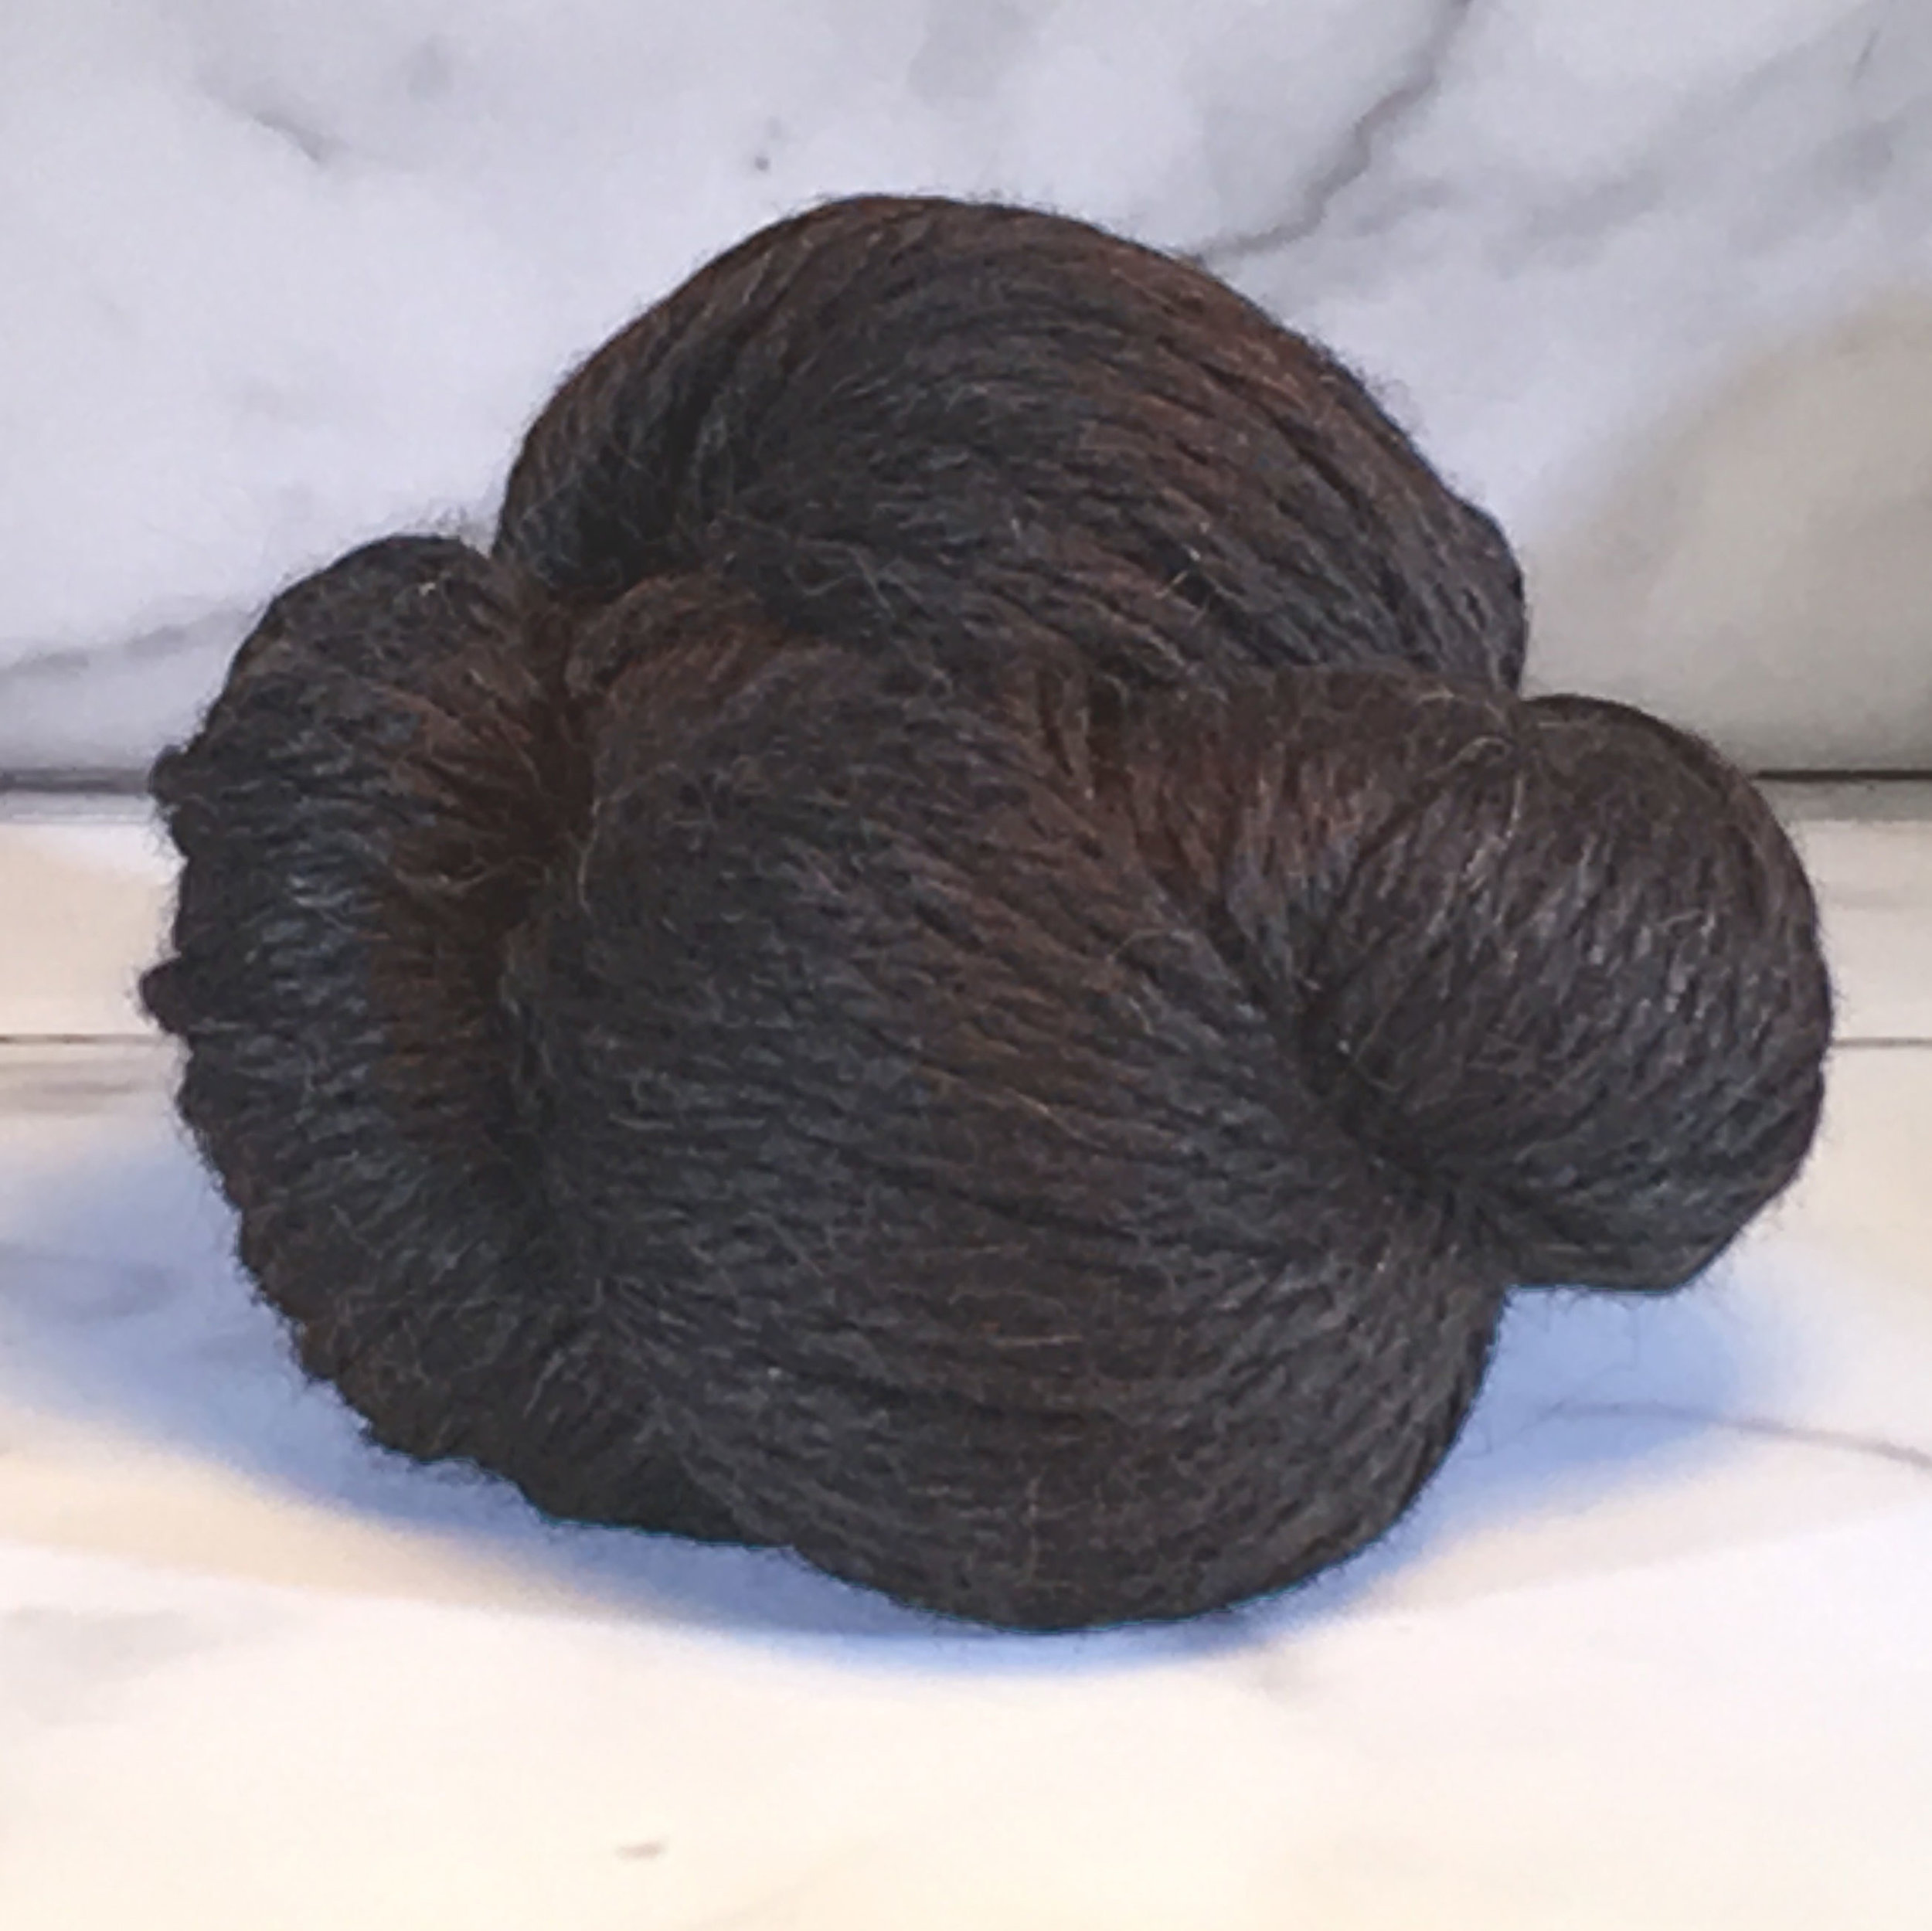 Juniper Moon Farm Herriot Great<br><strong>Heartwood Brown</strong><br>.